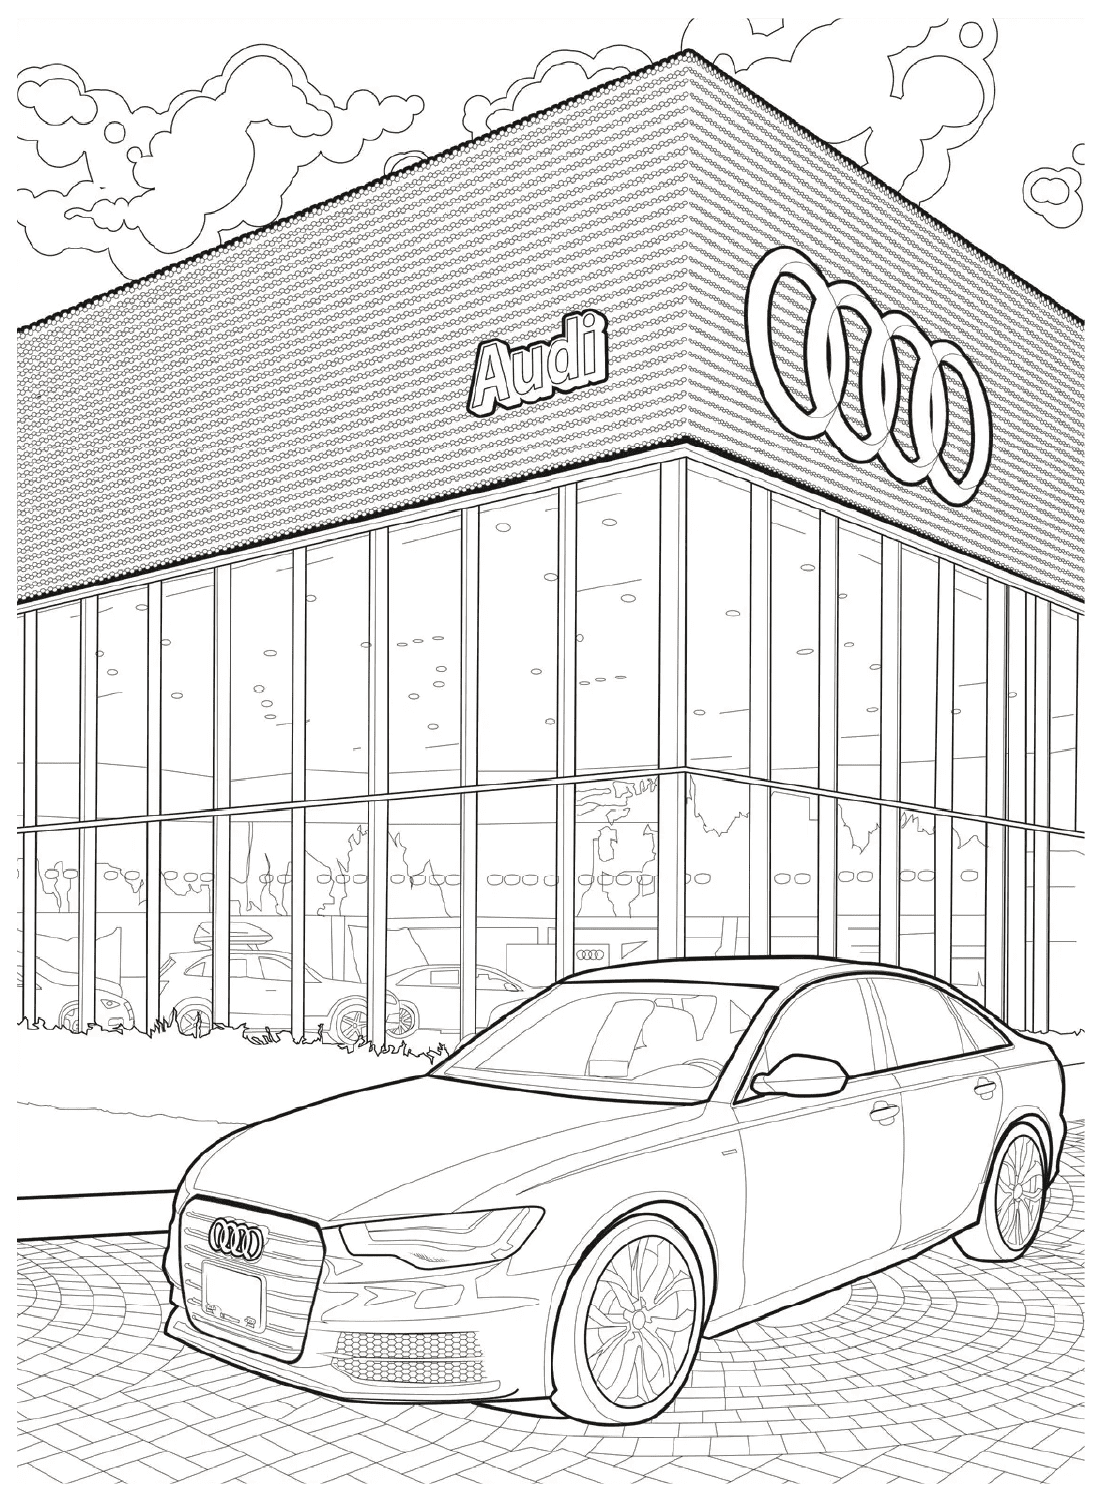 Printable Audi Cars Coloring Page - Free Printable Coloring Pages